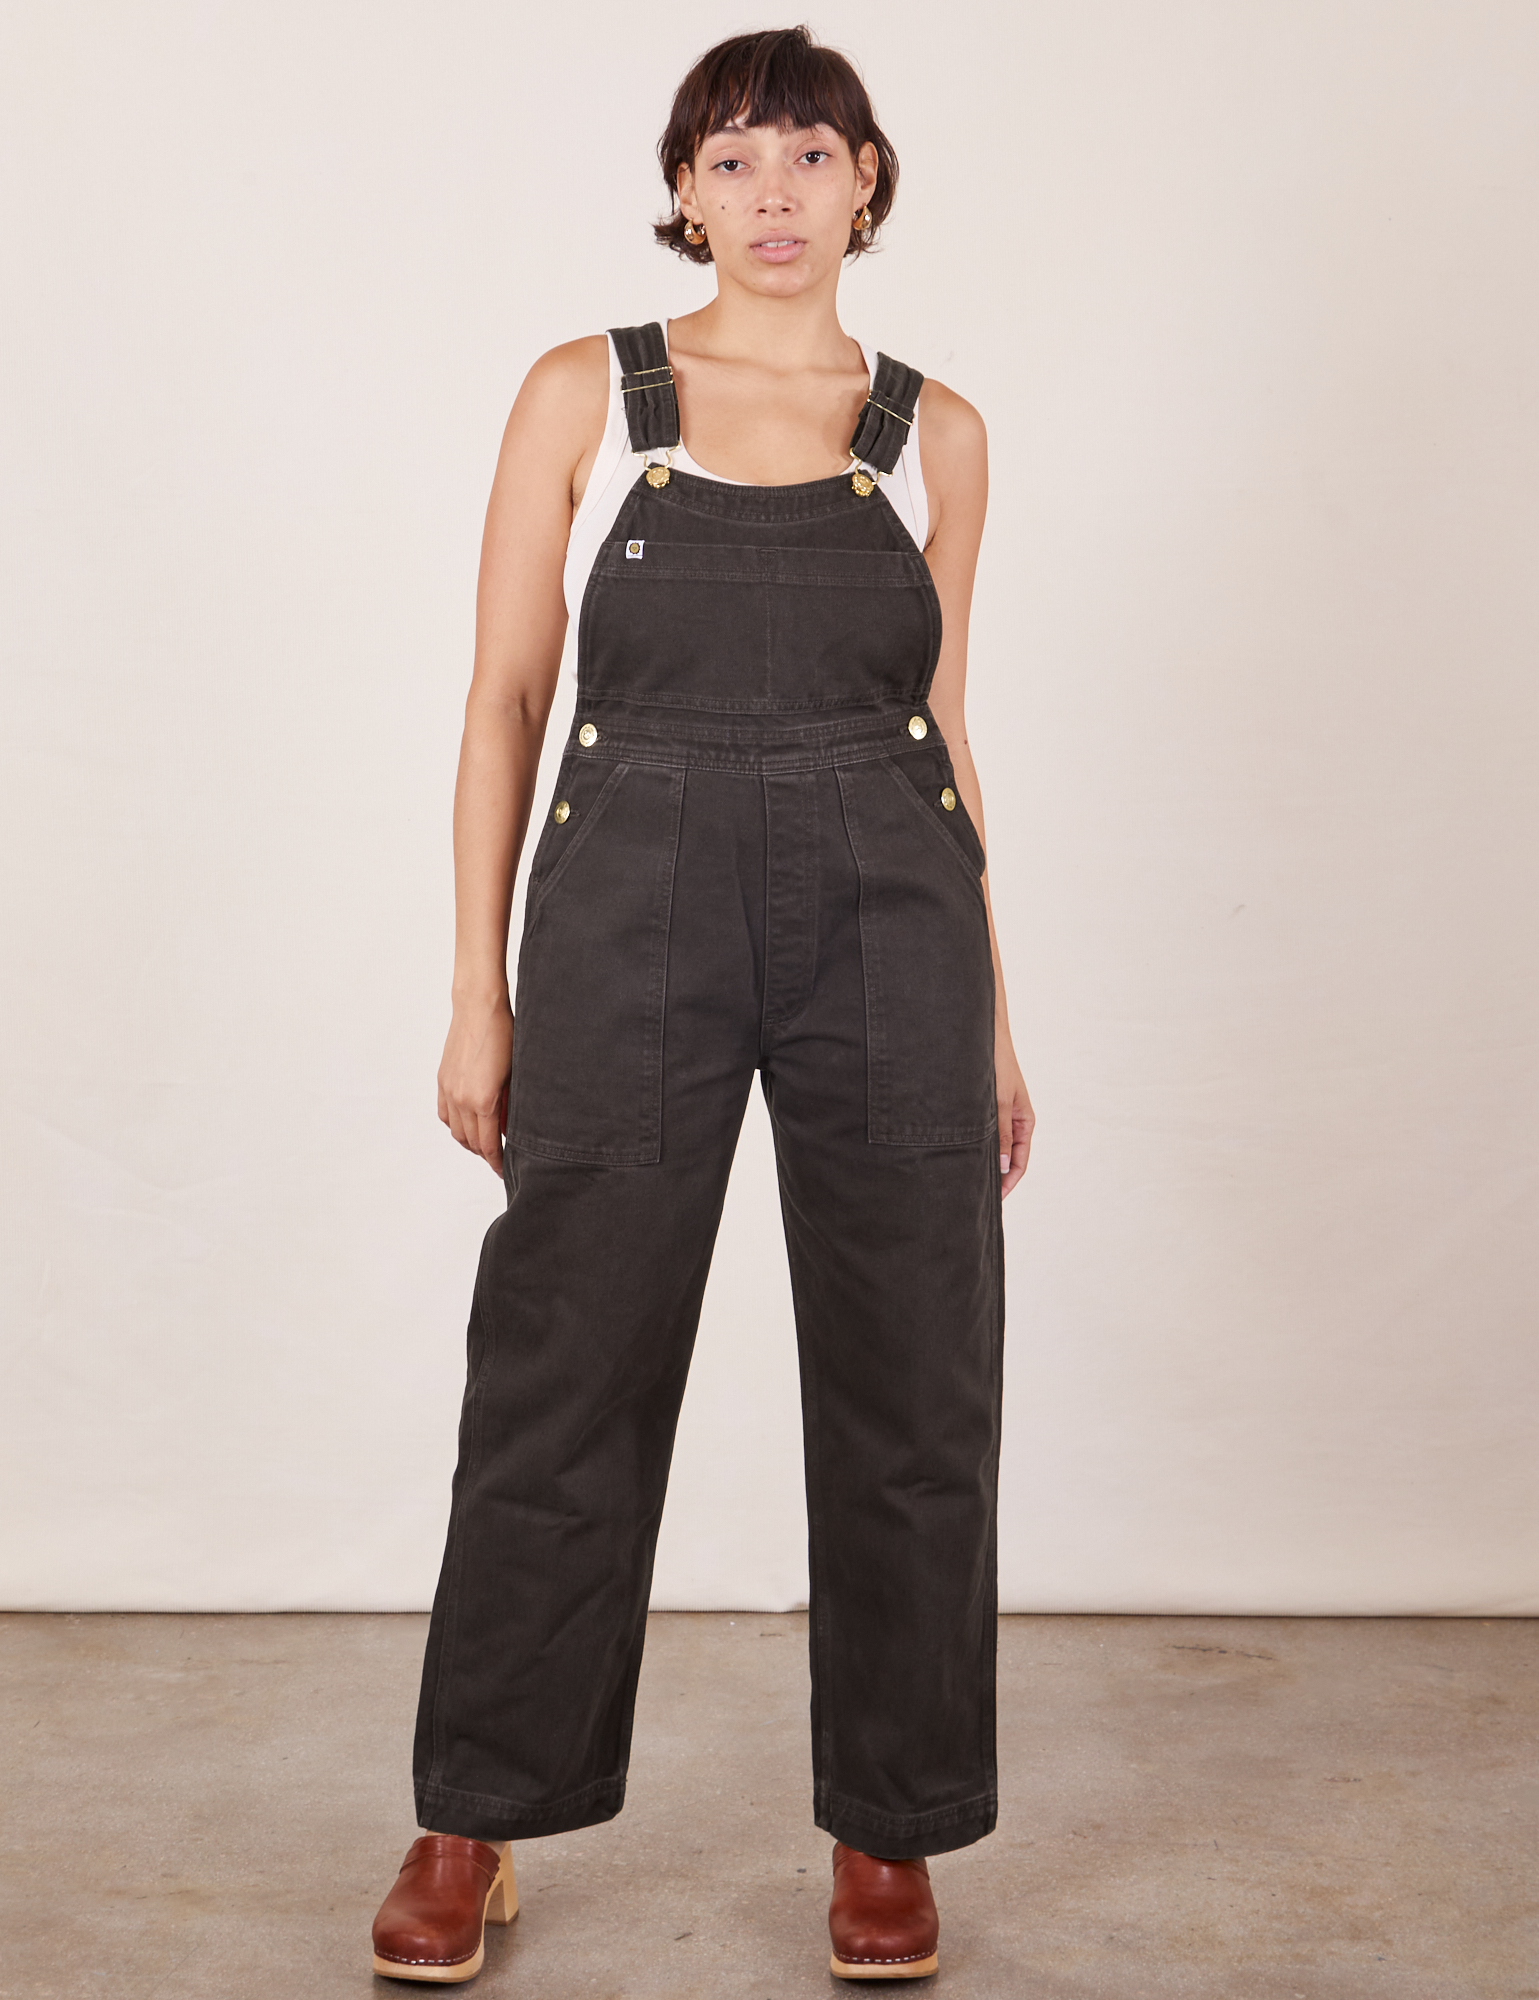 Tiara is 5&#39;4&quot; and wearing size XS Original Overalls in Mono Espresso with a vintage off-white Cropped Tank Top underneath.